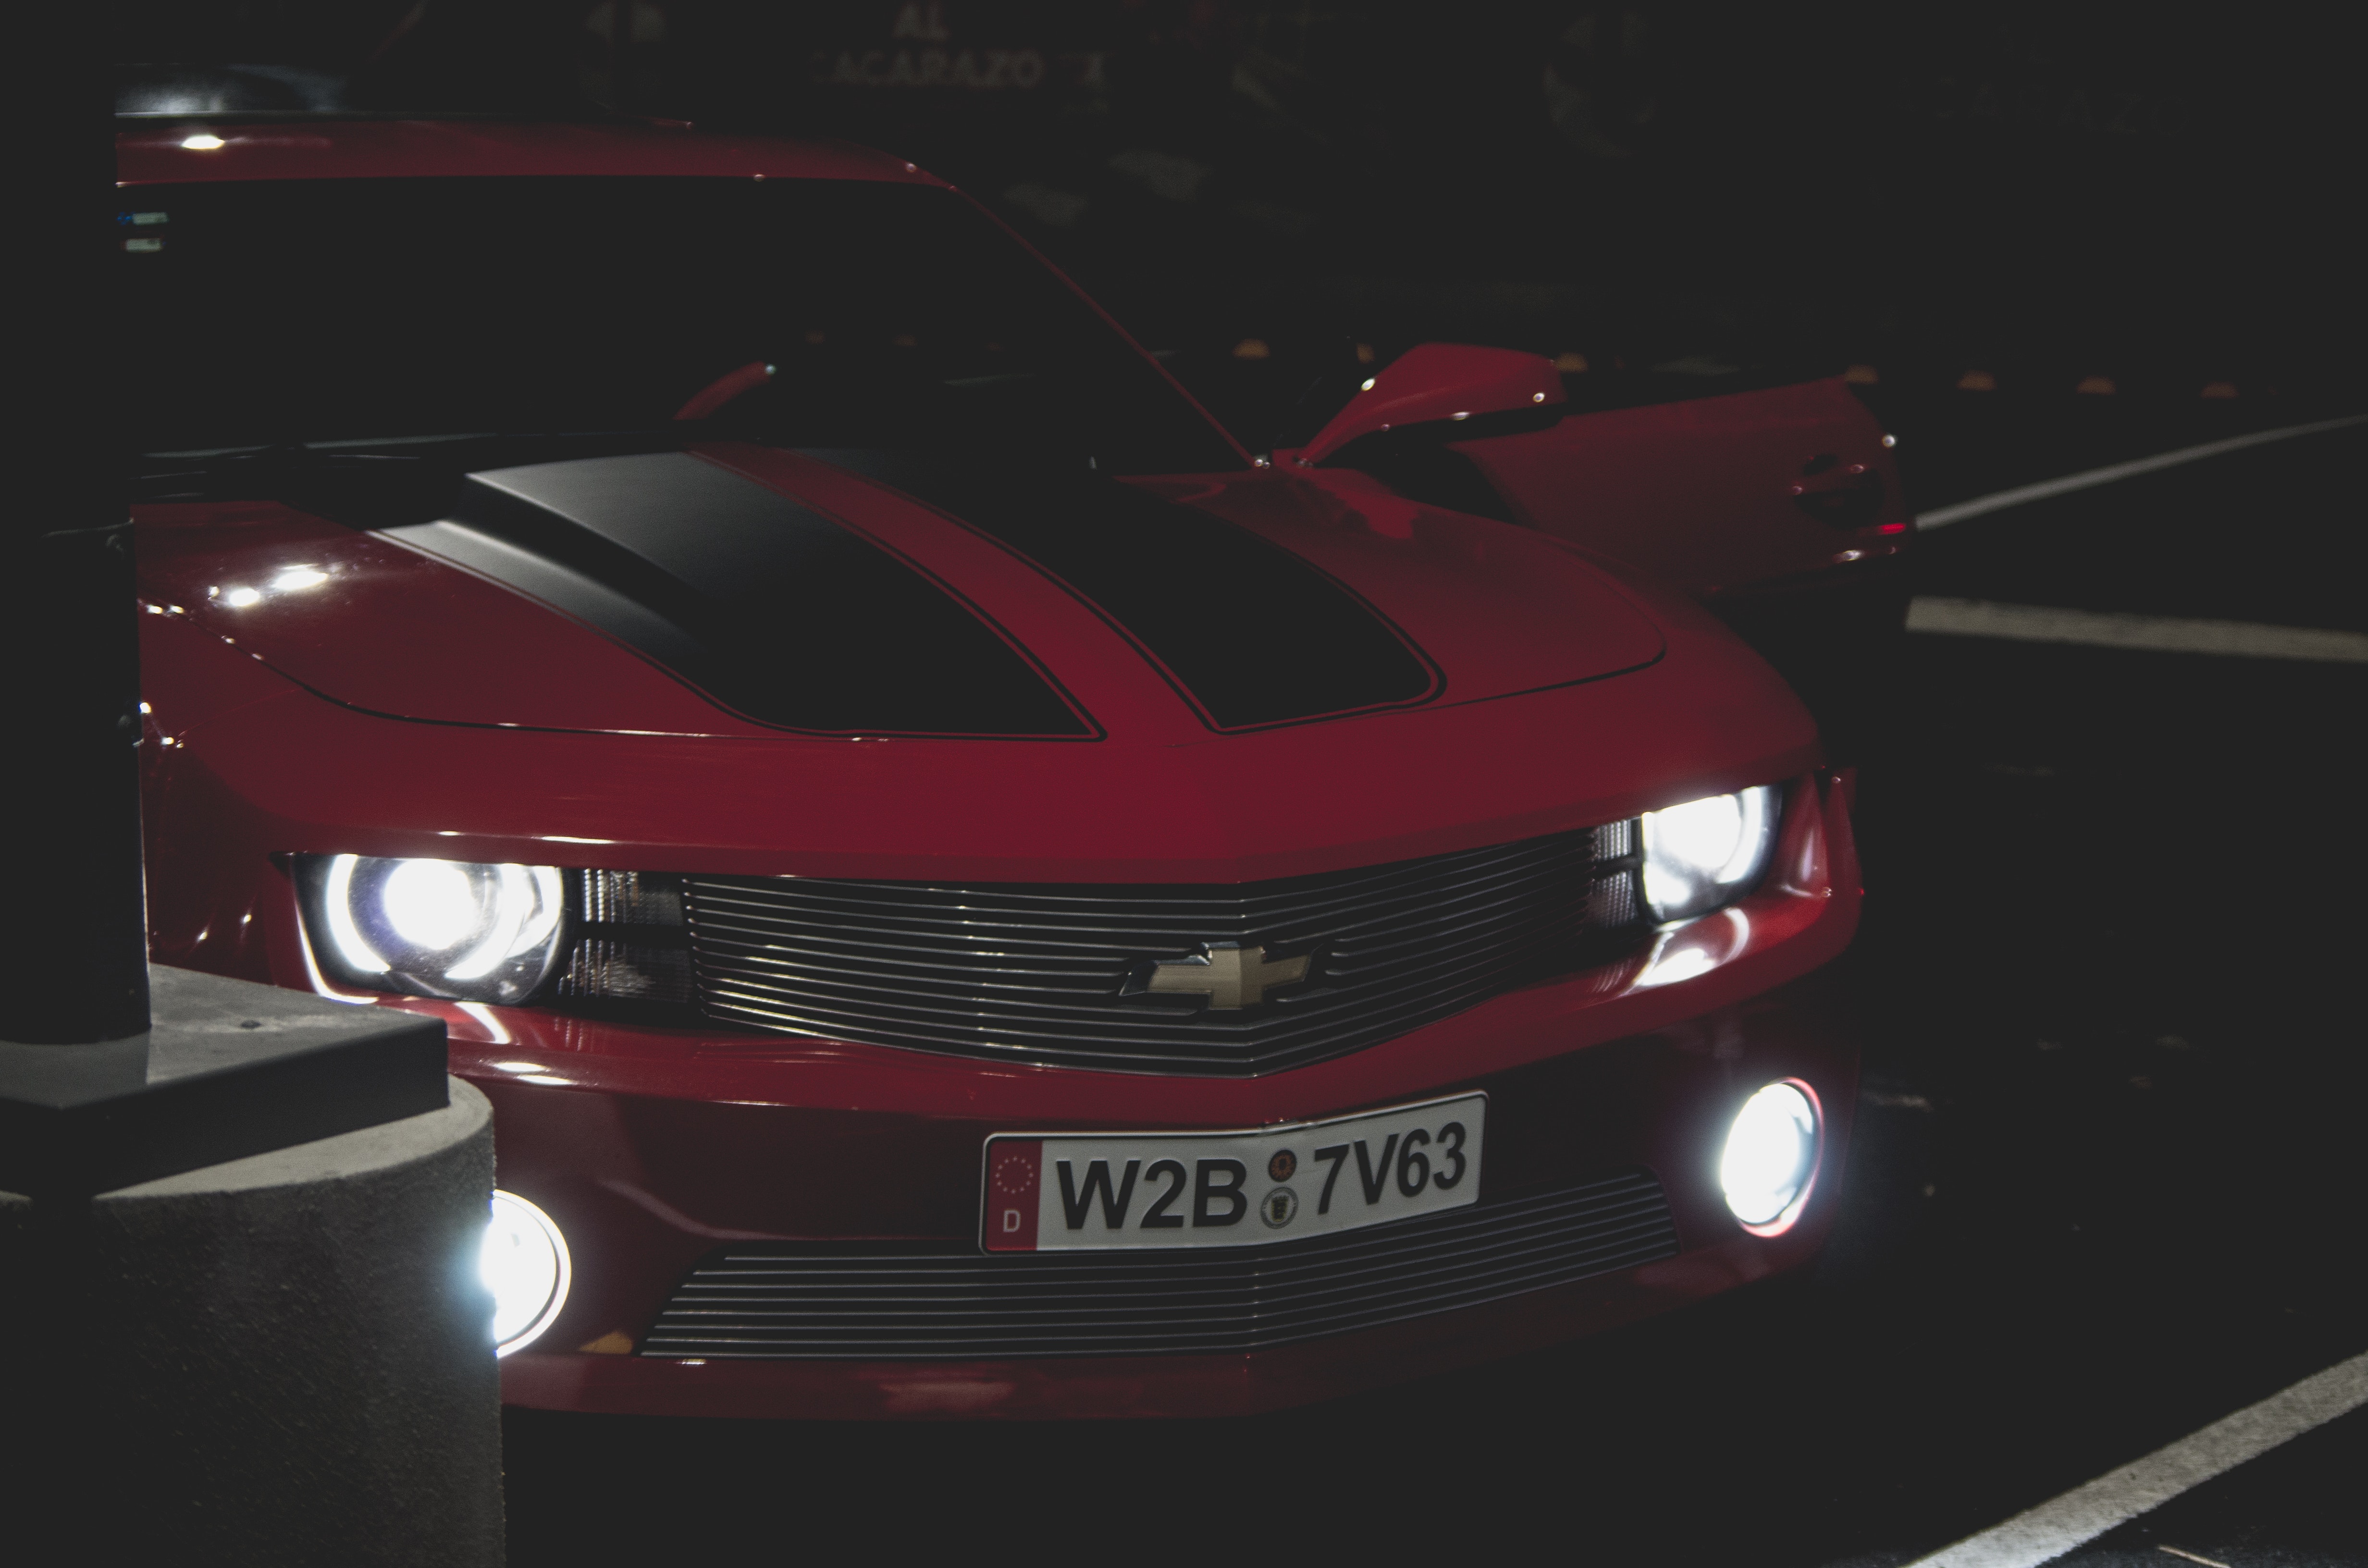 chevrolet camaro, cars, lights, front view, headlights, front bumper Full HD